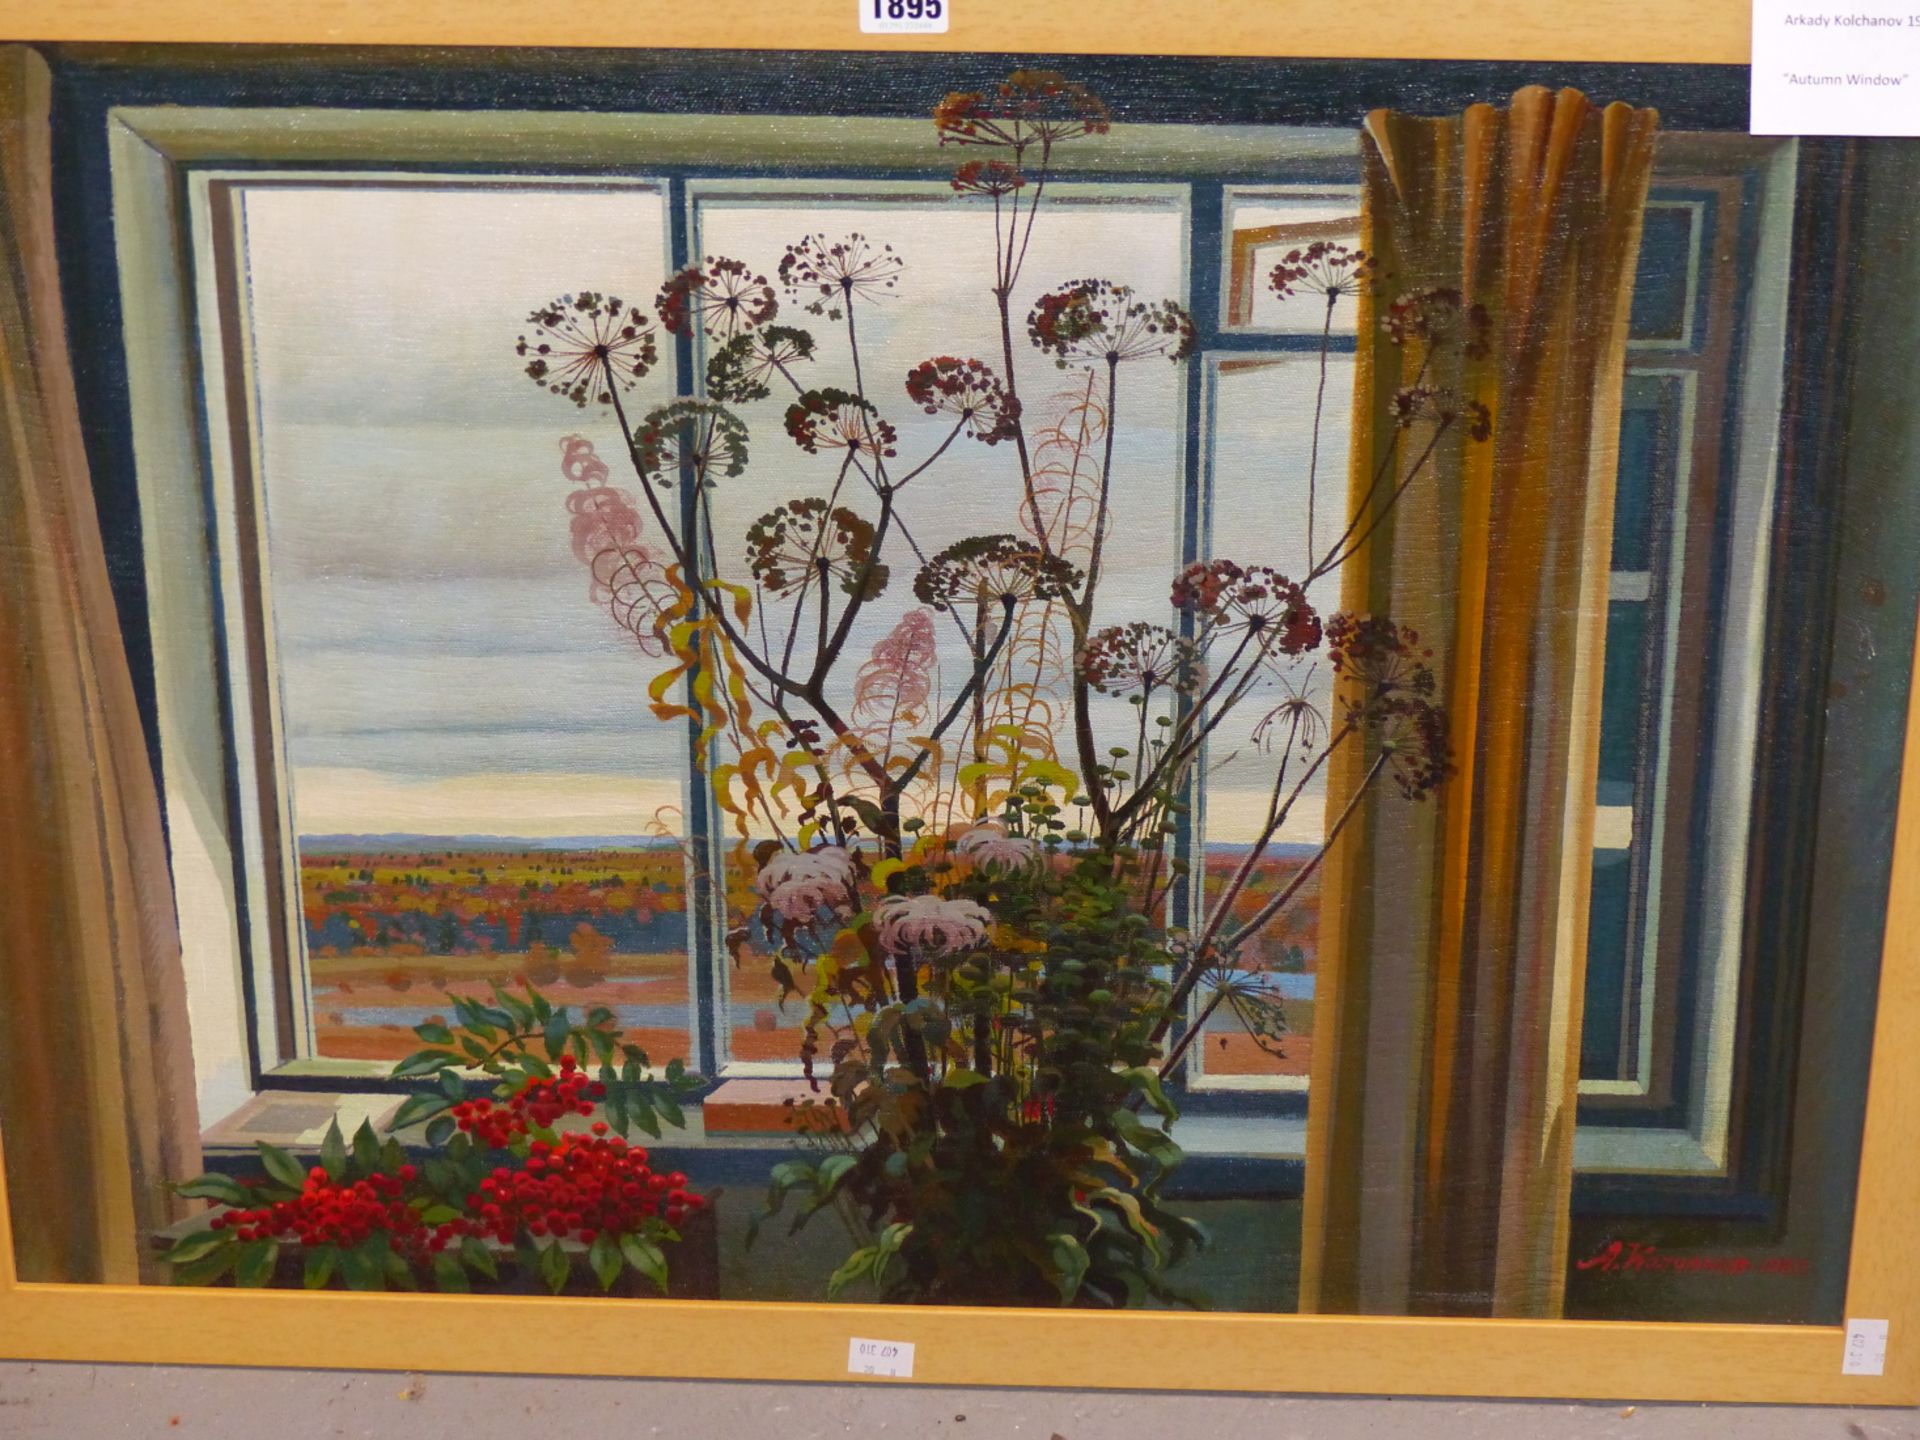 ARKADY MIKHAILOVICH KOLCHANOV (1925-2008) RUSSIAN, AUTUMN WINDOW, SIGNED AND DATED 1990, OIL ON - Image 2 of 6